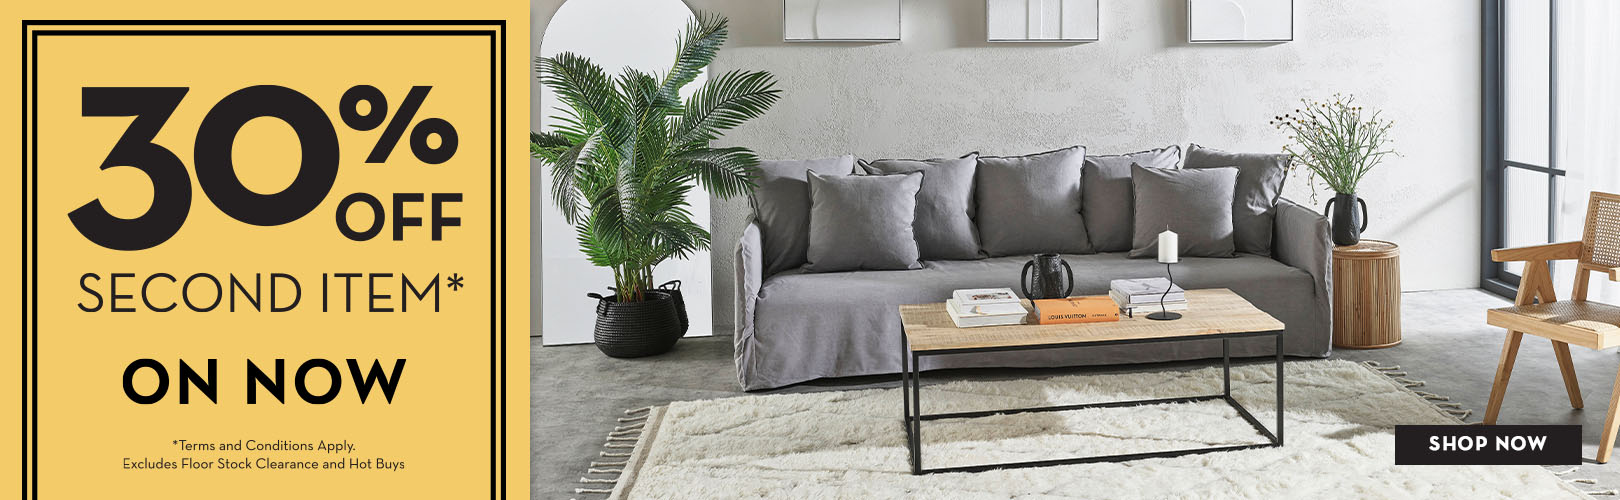 30% OFF second item on furniture and homeware at James Lane